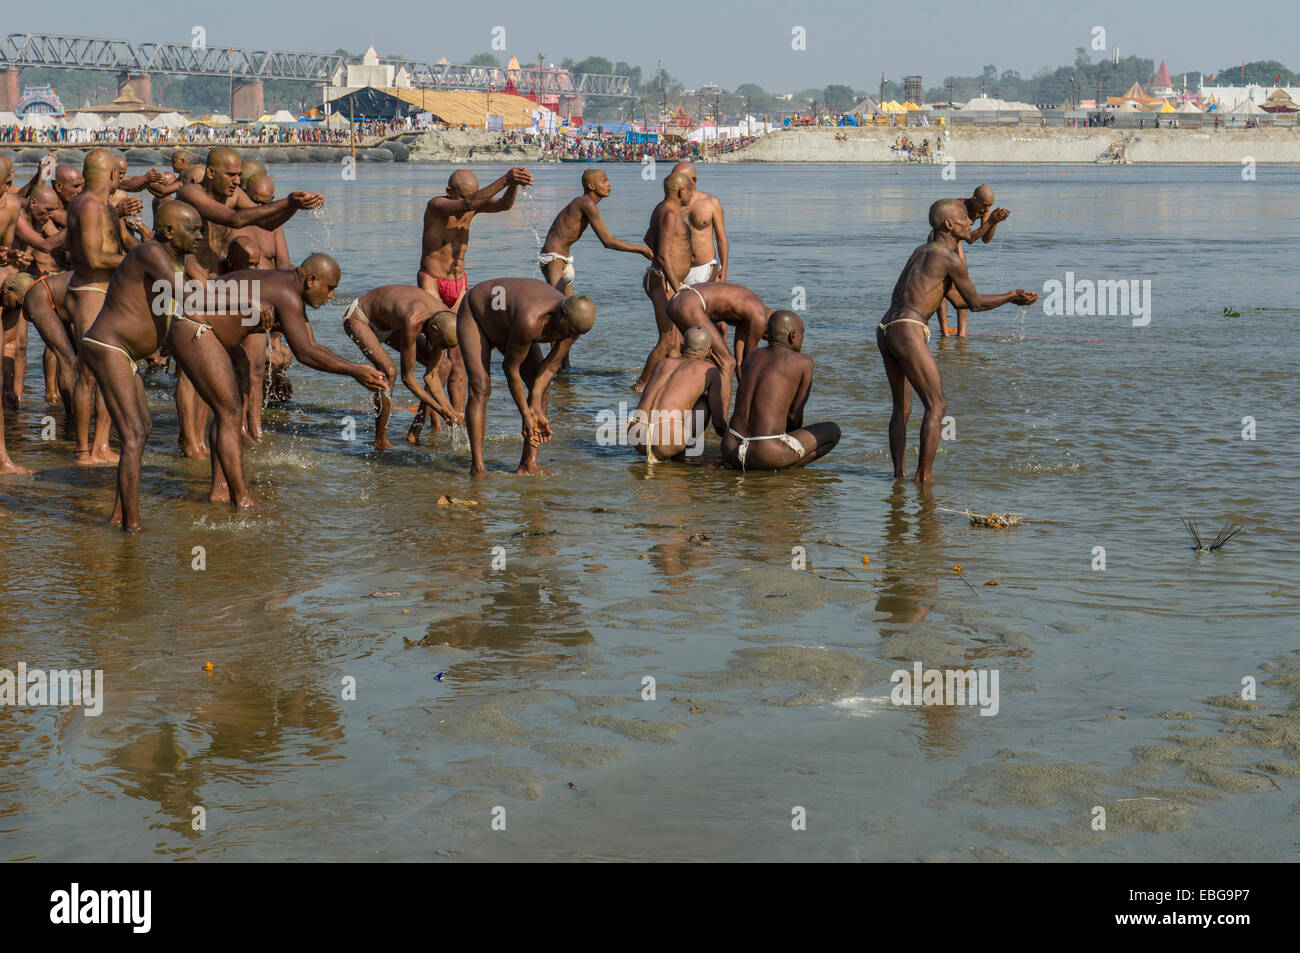 Group of new sadhus praying in the river Ganges as part of their initiation, during Kumbha Mela festival, Allahabad Stock Photo